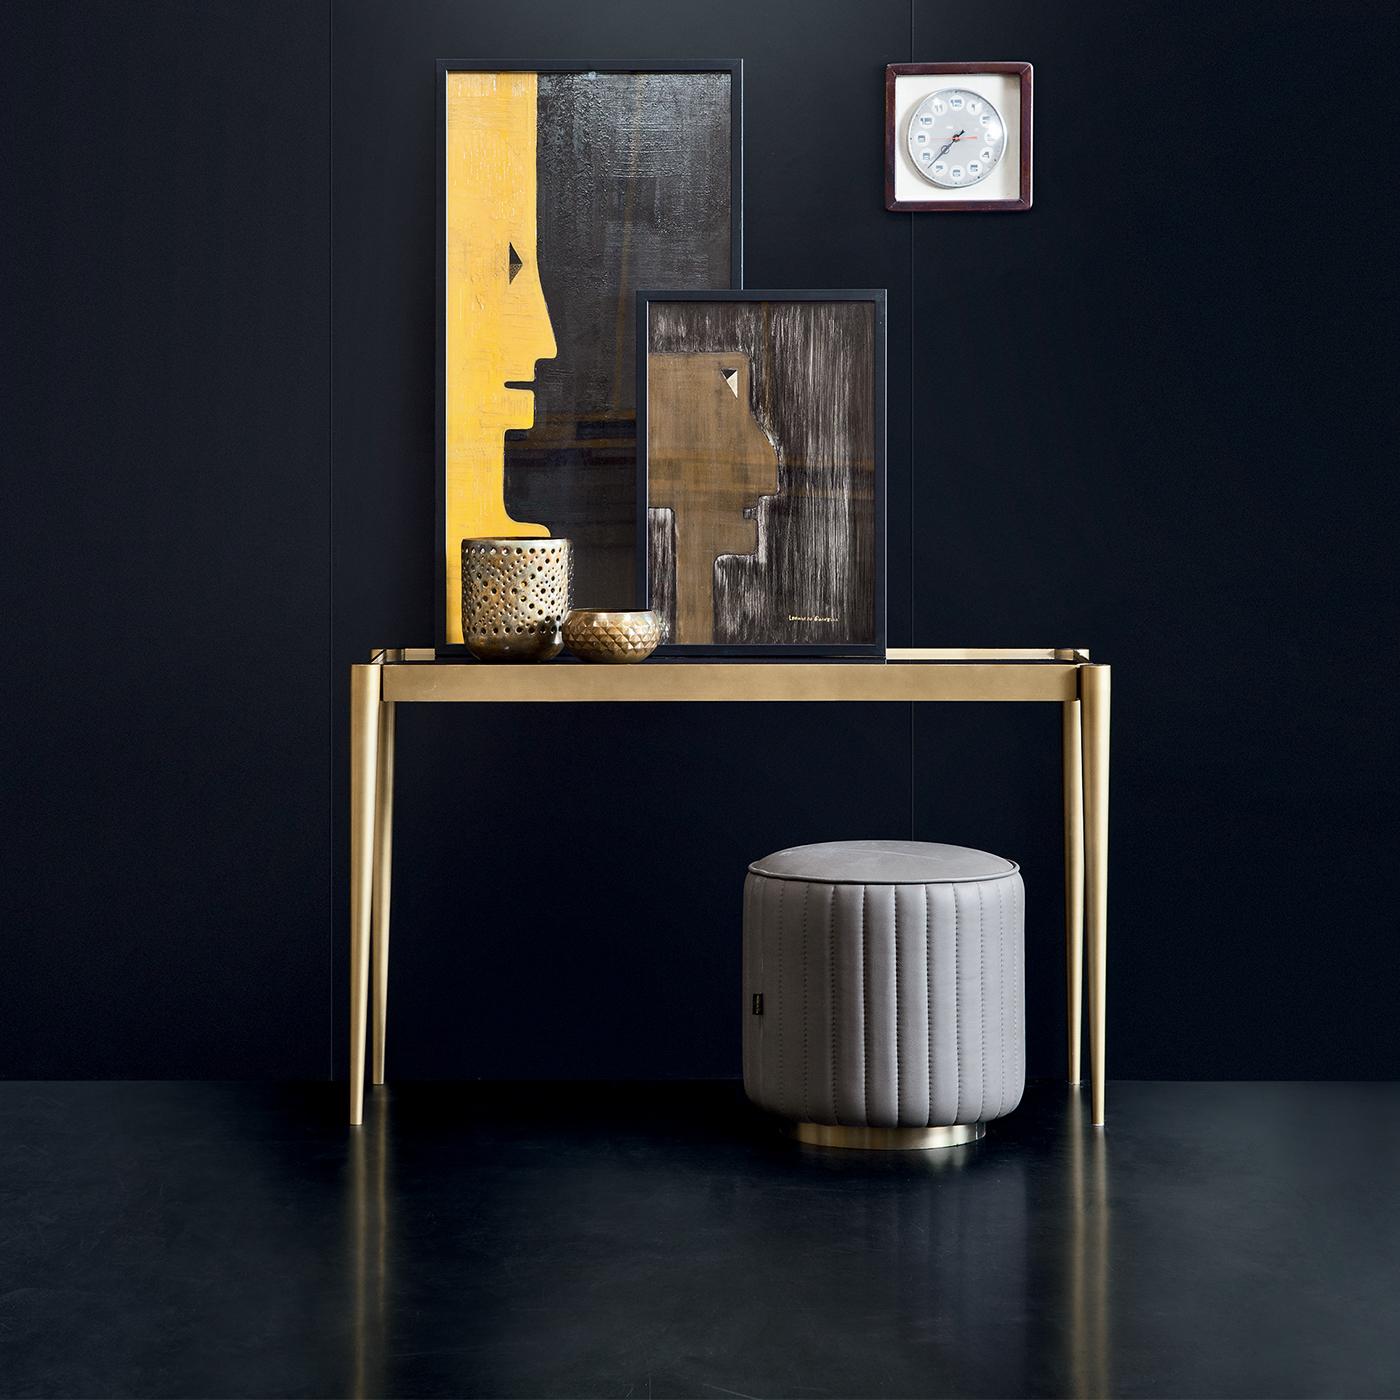 A simple, Minimalist design transforms this console in an extremely functional and versatile piece of decor. The rectangular stainless steel structure has a polished brushed brass finish and features four long tapered legs encased in a frame